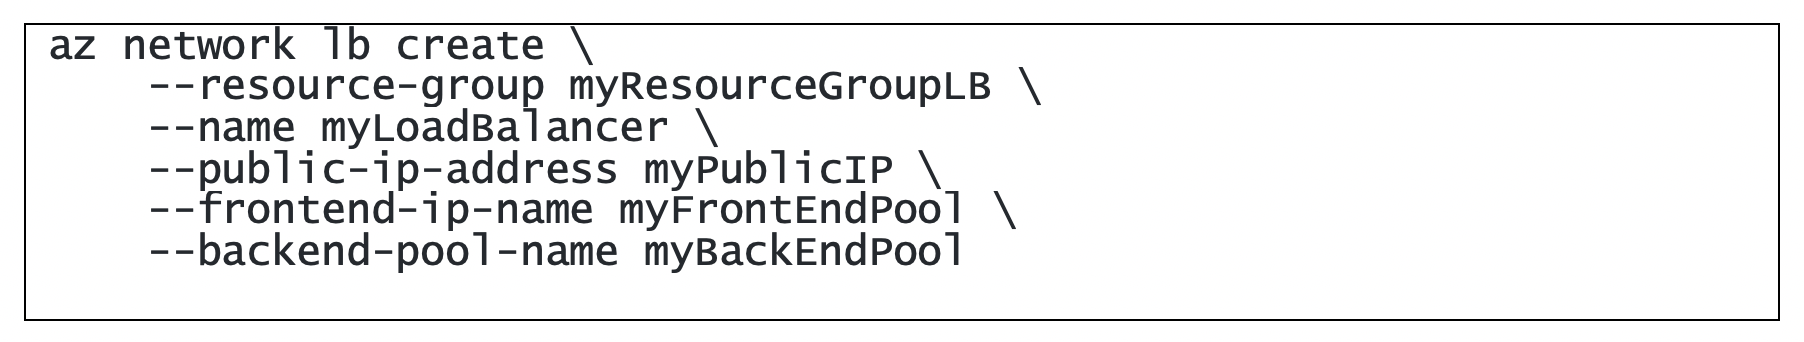 CLI for provisioning ILB in Azure 